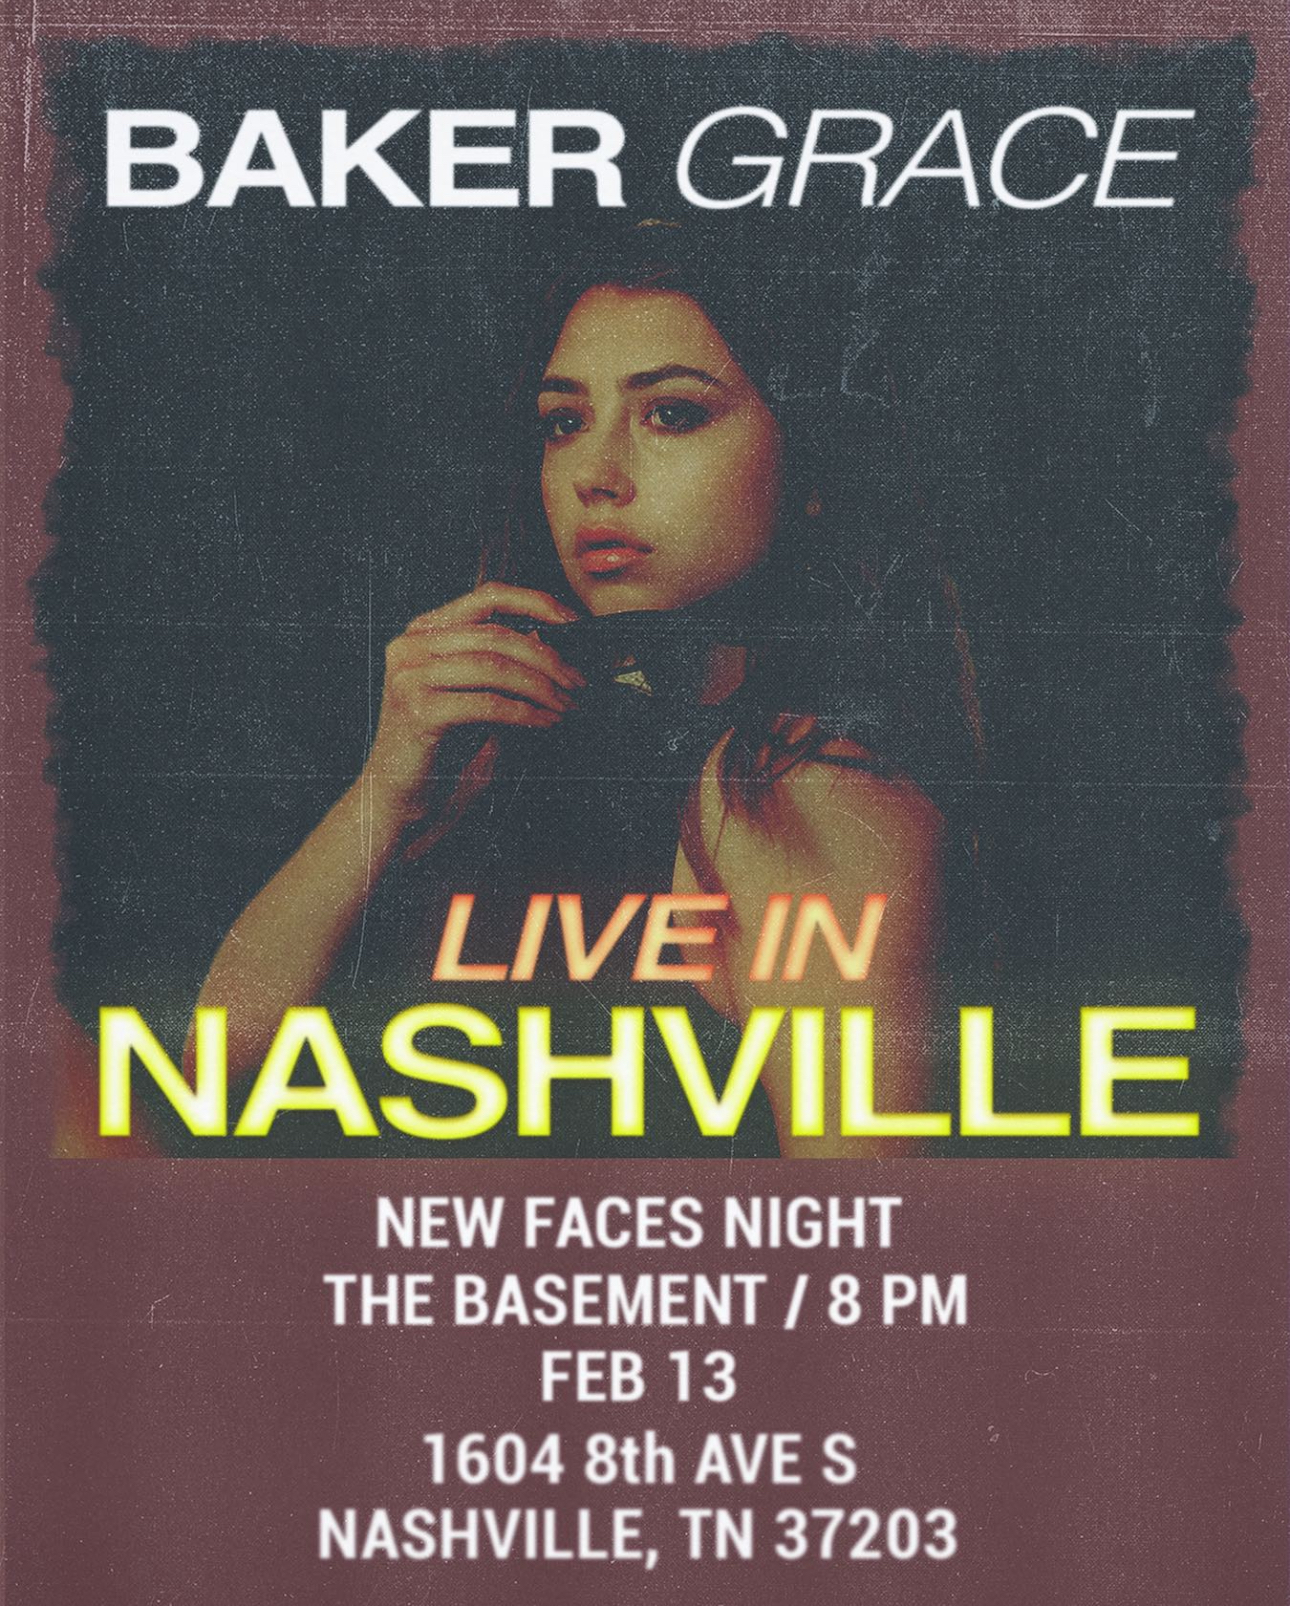 Baker Grace To Perform For New Faces Night At The Basement In Nashville February 13th, 2024